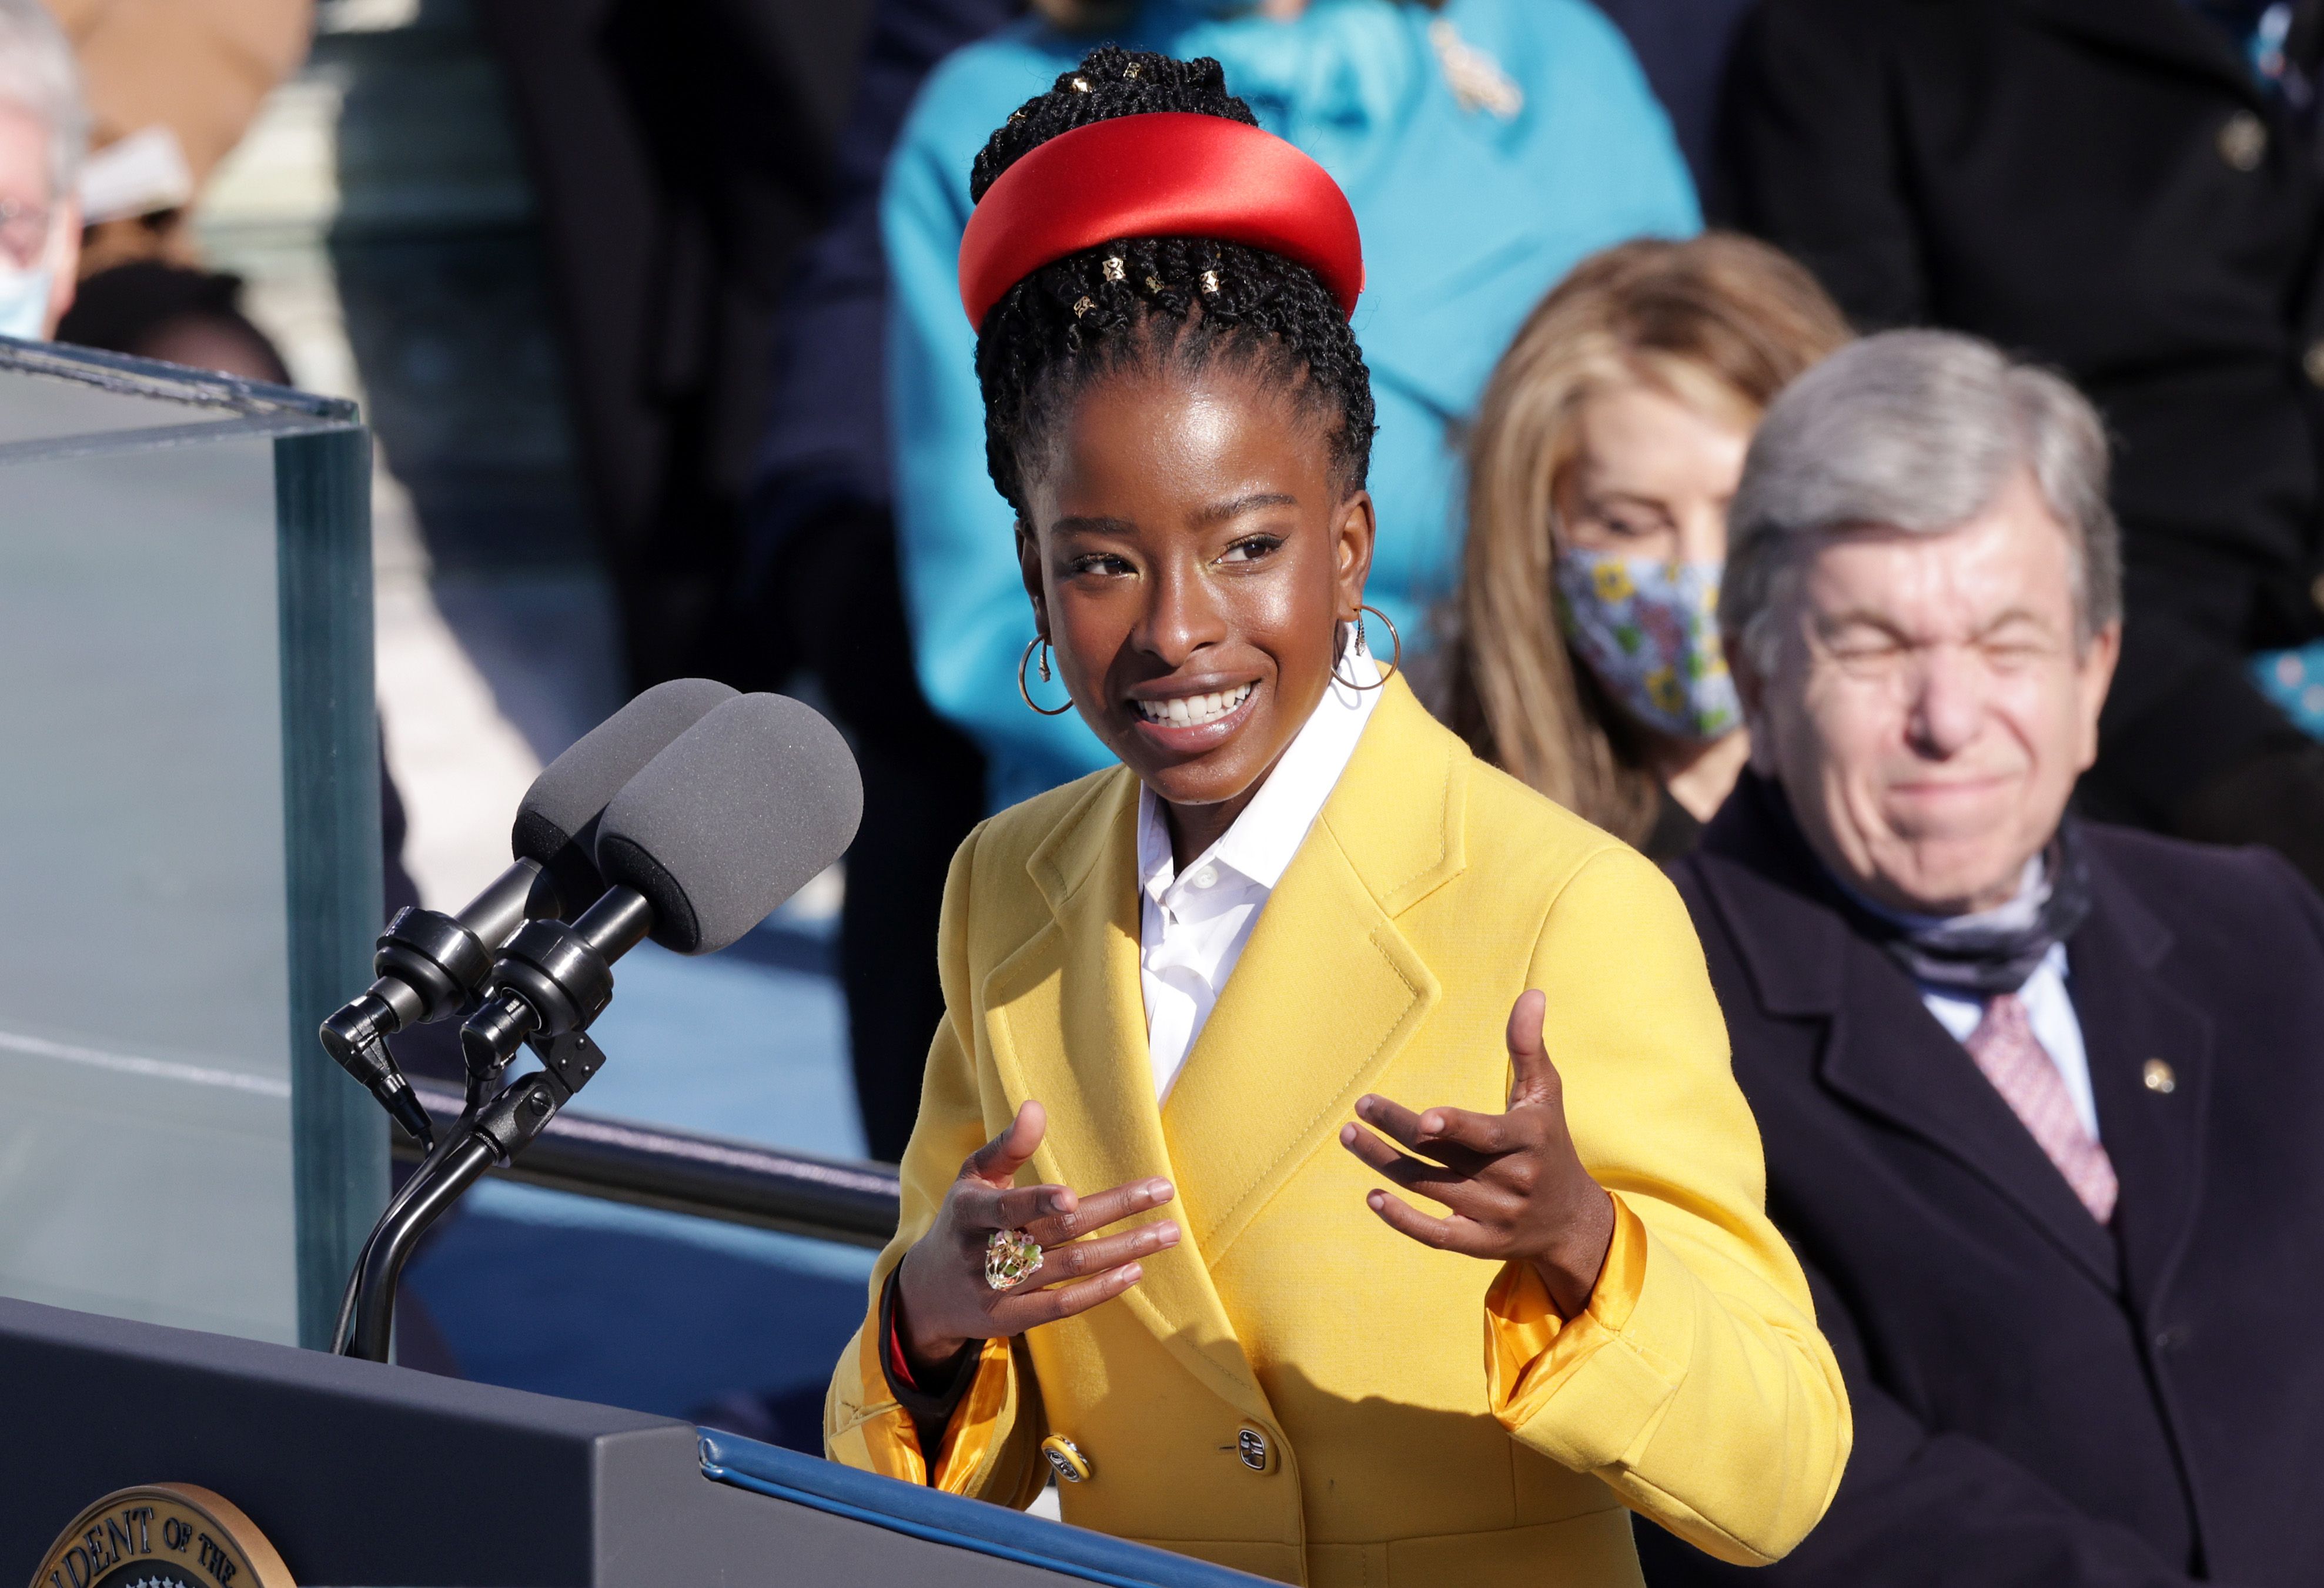 Amanda Gorman speaks during the inauguration of US President Joe Biden at the US Capitol on January 20, 2021, in Washington, DC. | Photo: Alex Wong/Getty Images